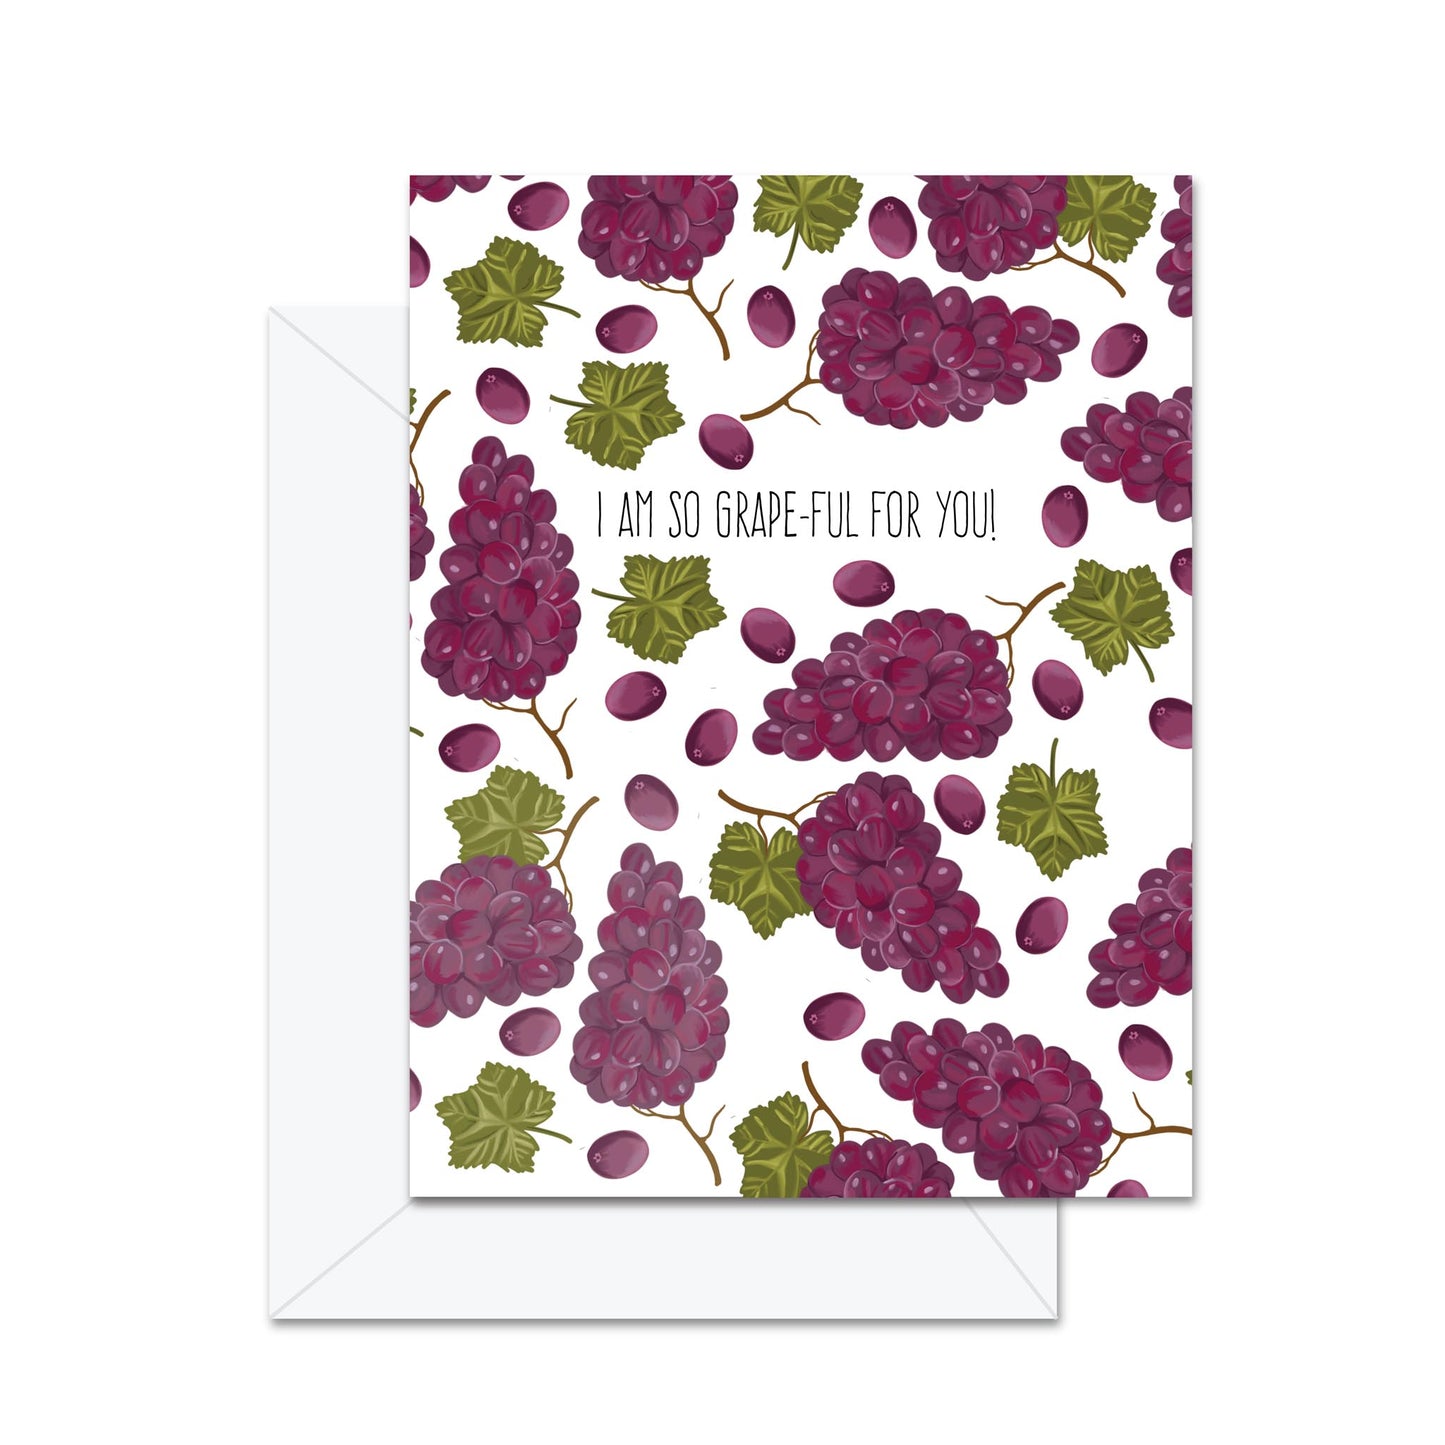 I Am So Grape-ful For You! - Greeting Card